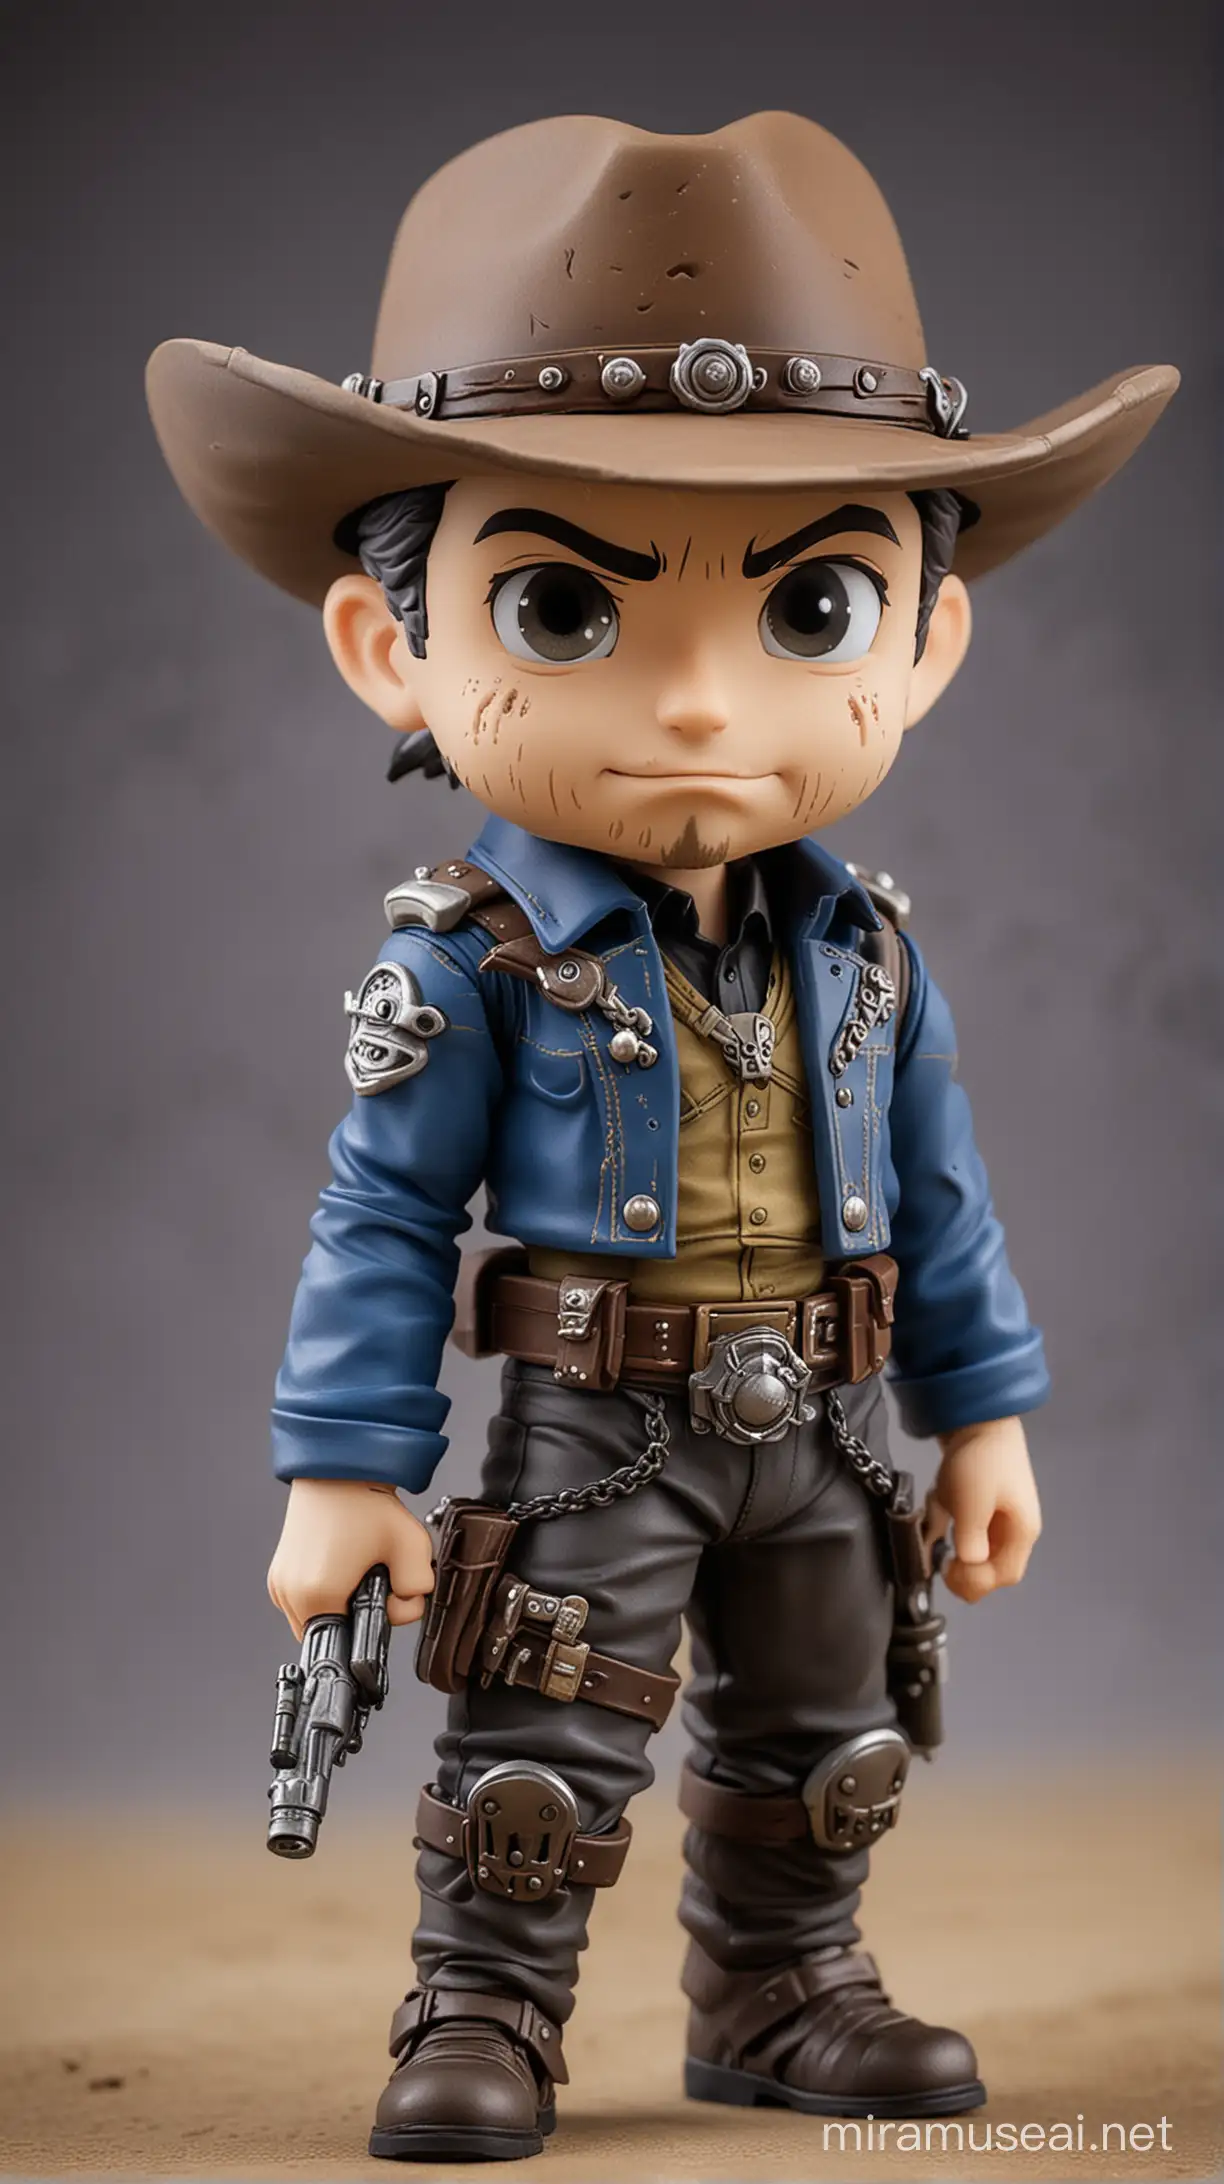 Chibi Nendoroid Necrotic Cowboy from Fallout Prime Video Series